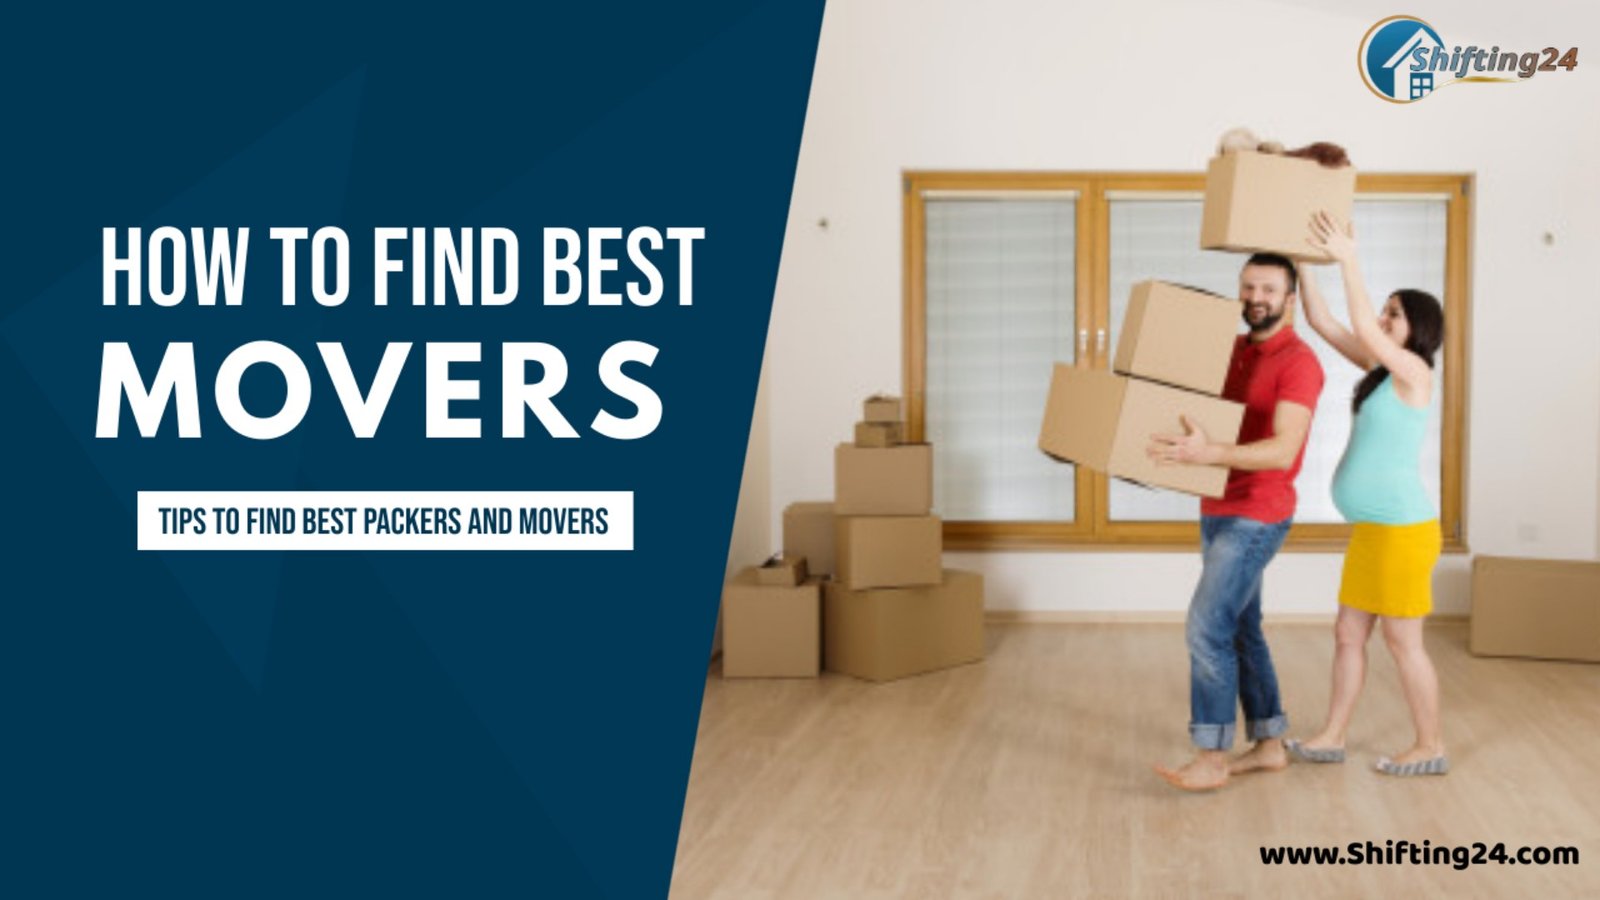 How To Find Good & Trusted Packers And Movers In Bangalore?